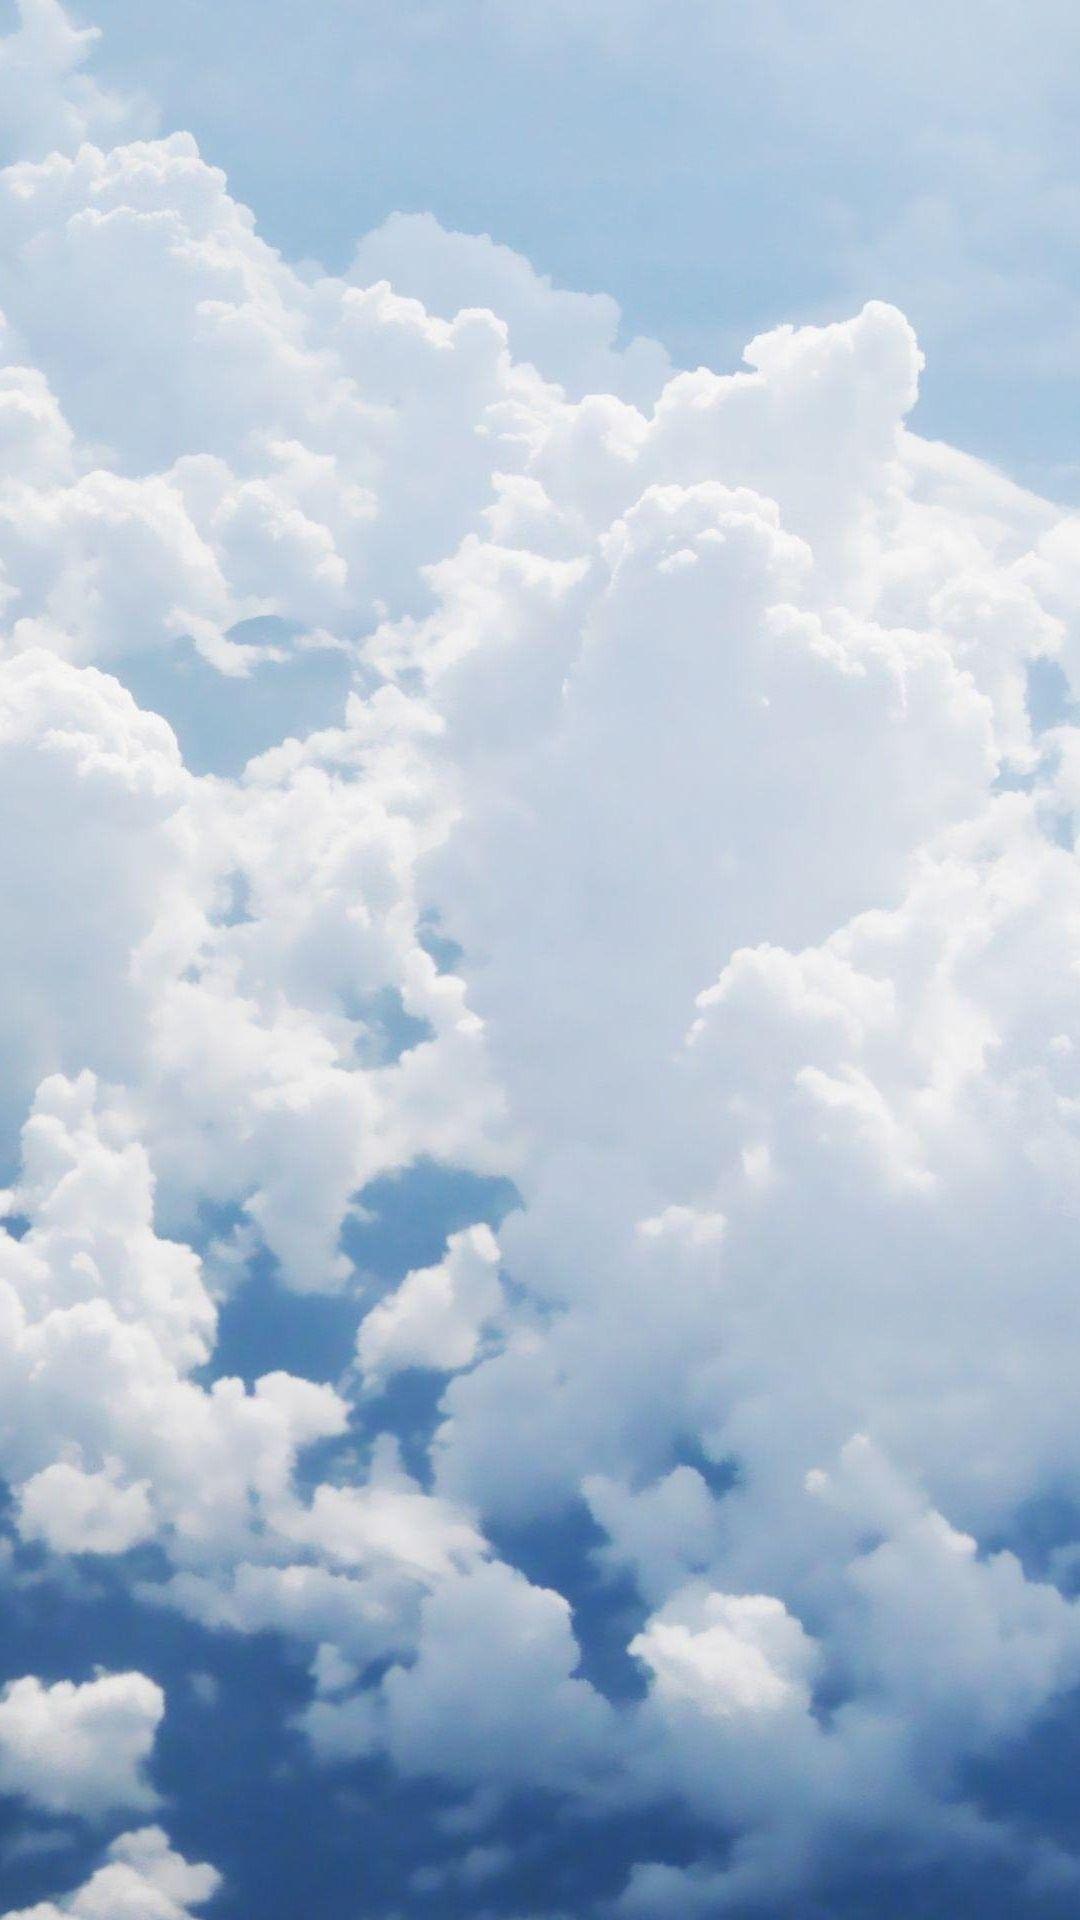 60 Sky Backgrounds That Are Perfect For Your Phone  World of Printables